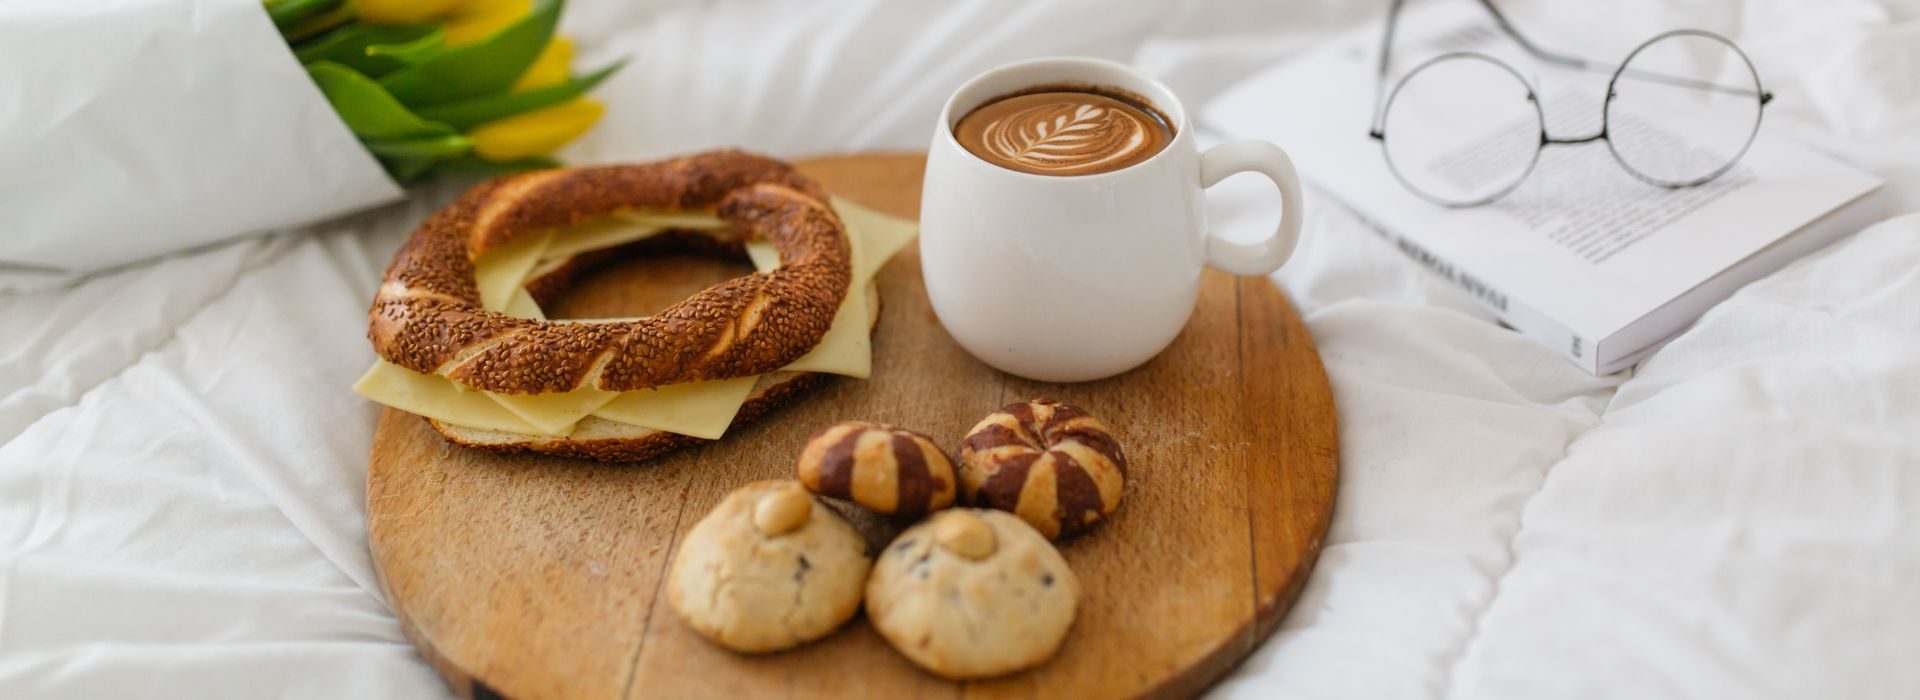 Breakfast in bed with rolls, cheese, cookies and hot beverage on a wooden tray.